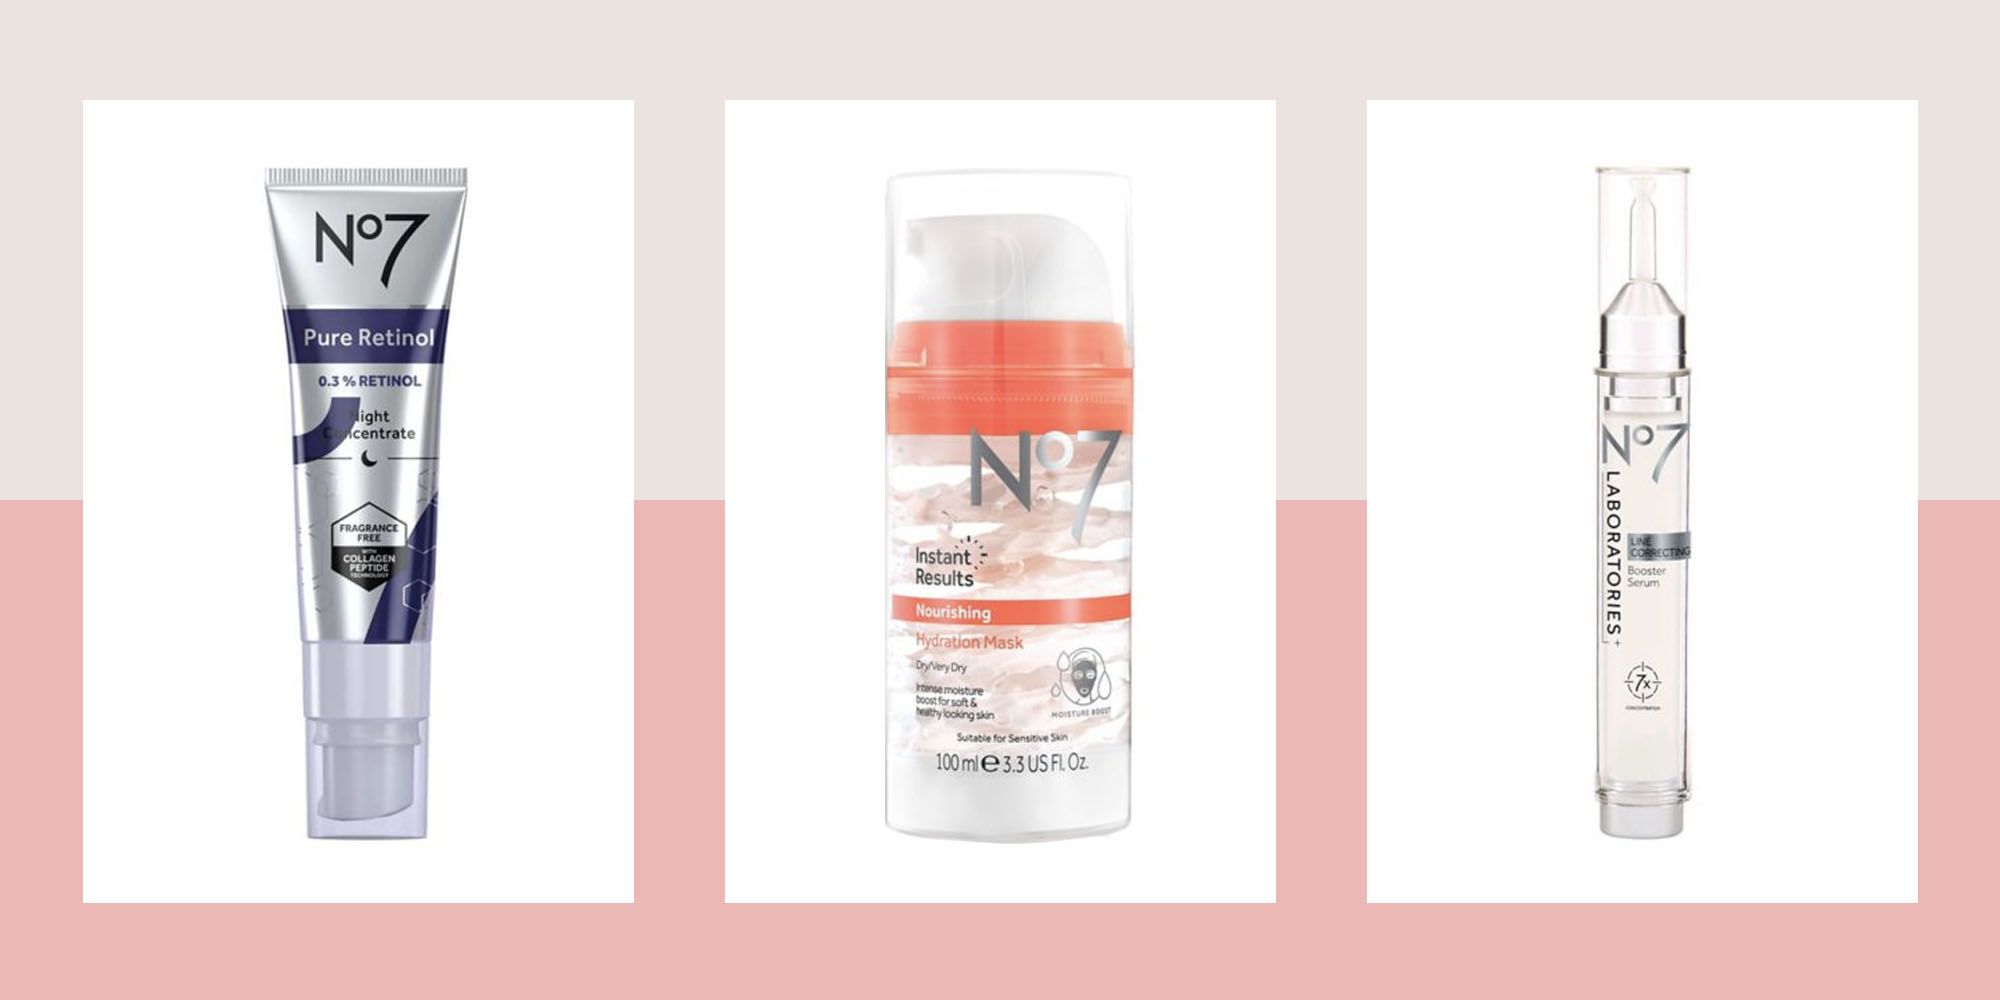 We try No7, the UK's top selling skincare brand.